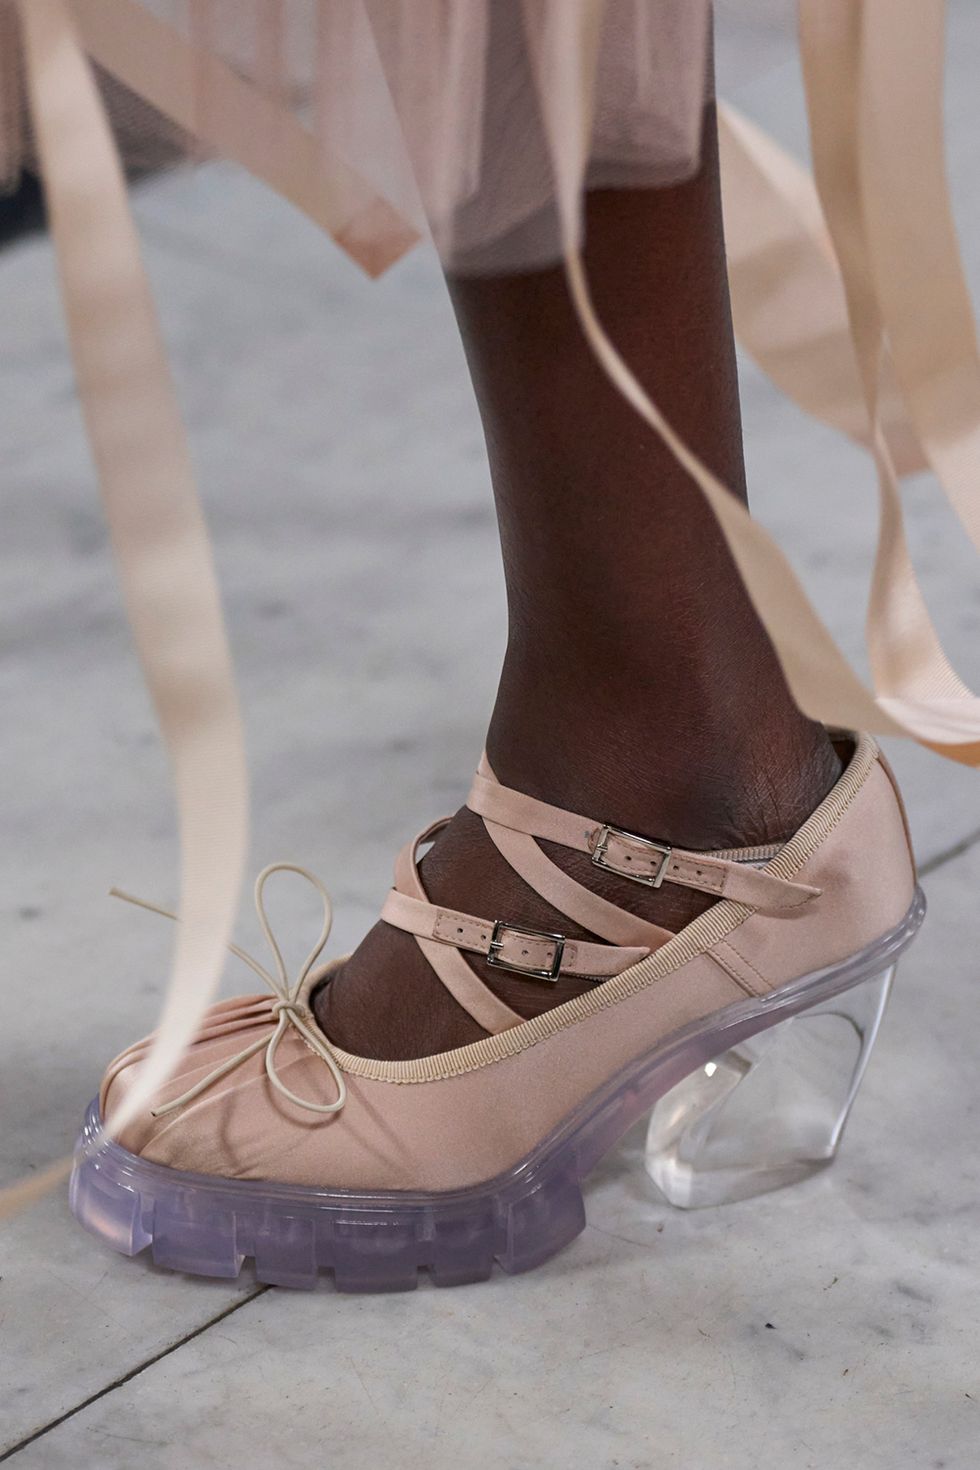 The Big Toe Shoe Trend Is Huge For 2019